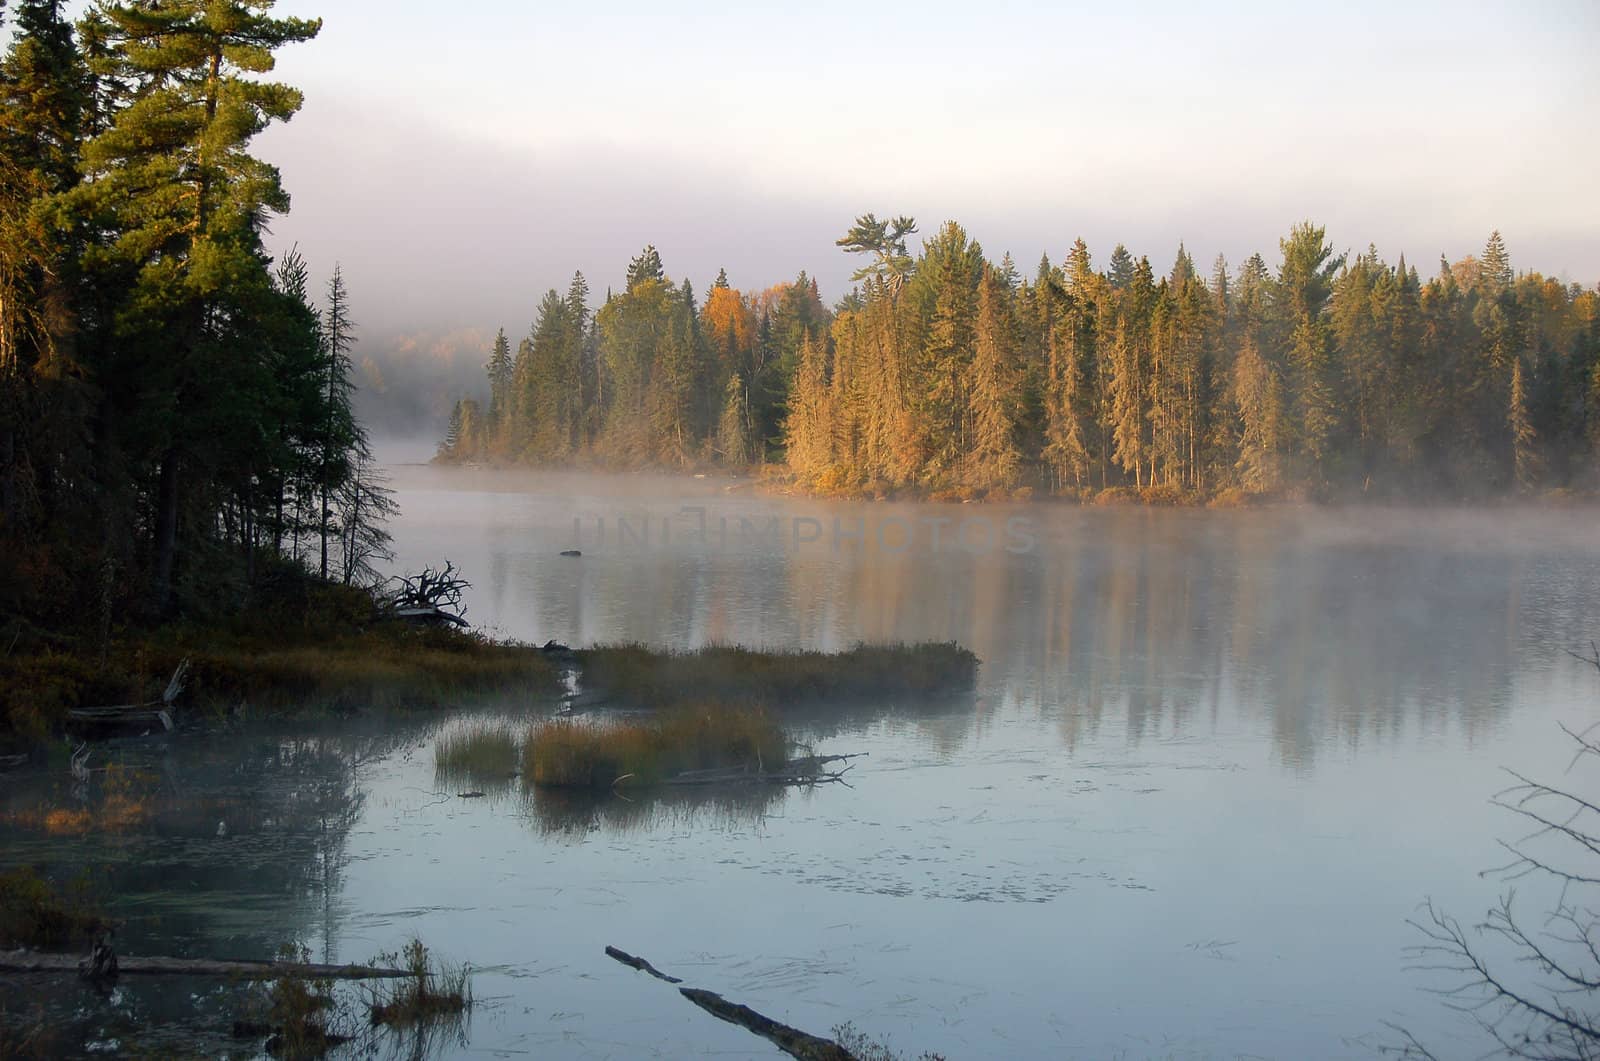 Early morning picture of a lake with mist coming up in fall